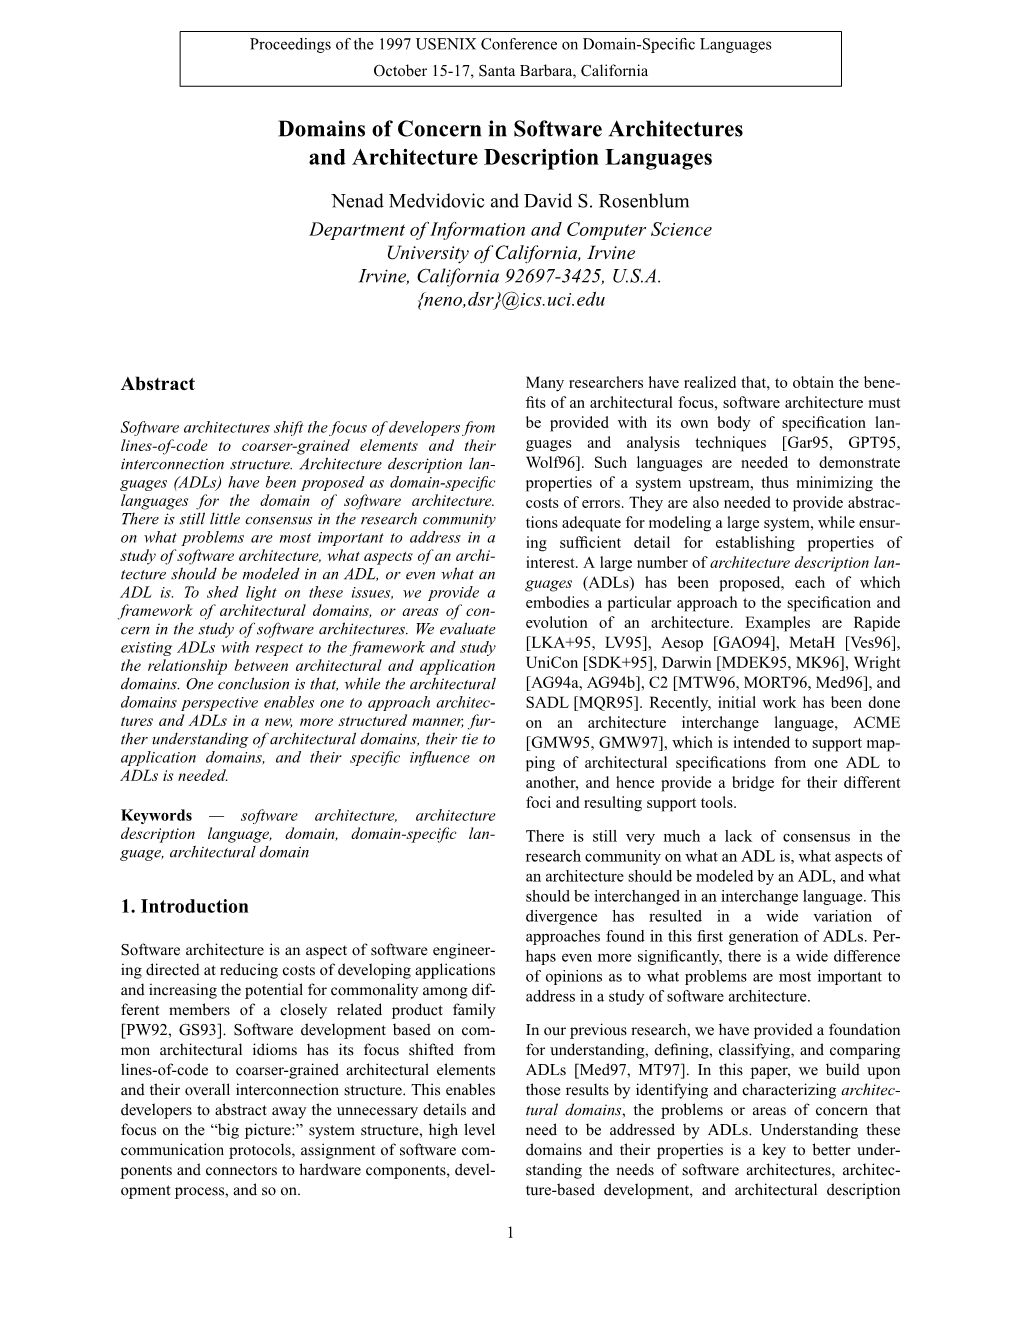 Domains of Concern in Software Architectures and Architecture Description Languages